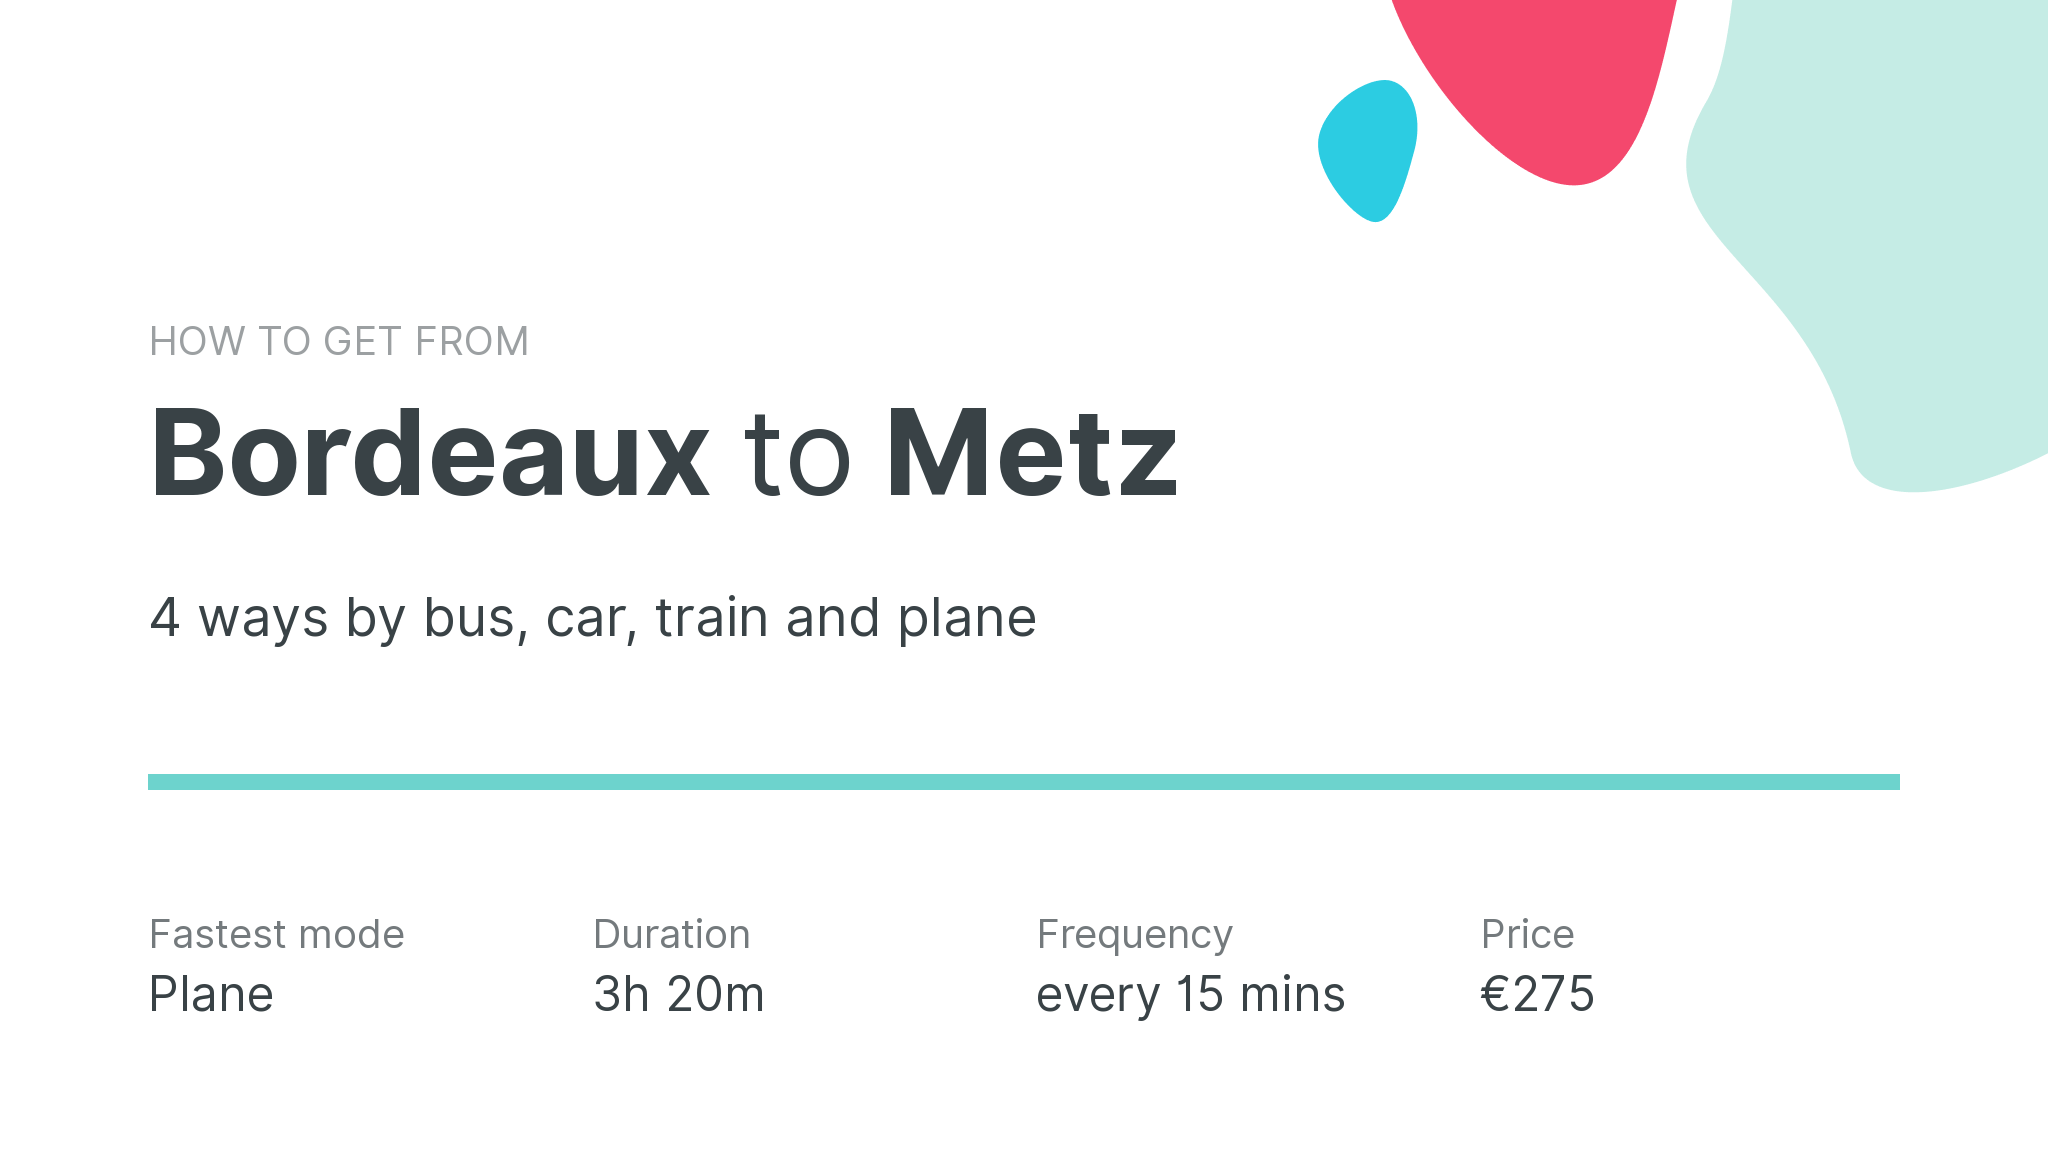 How do I get from Bordeaux to Metz